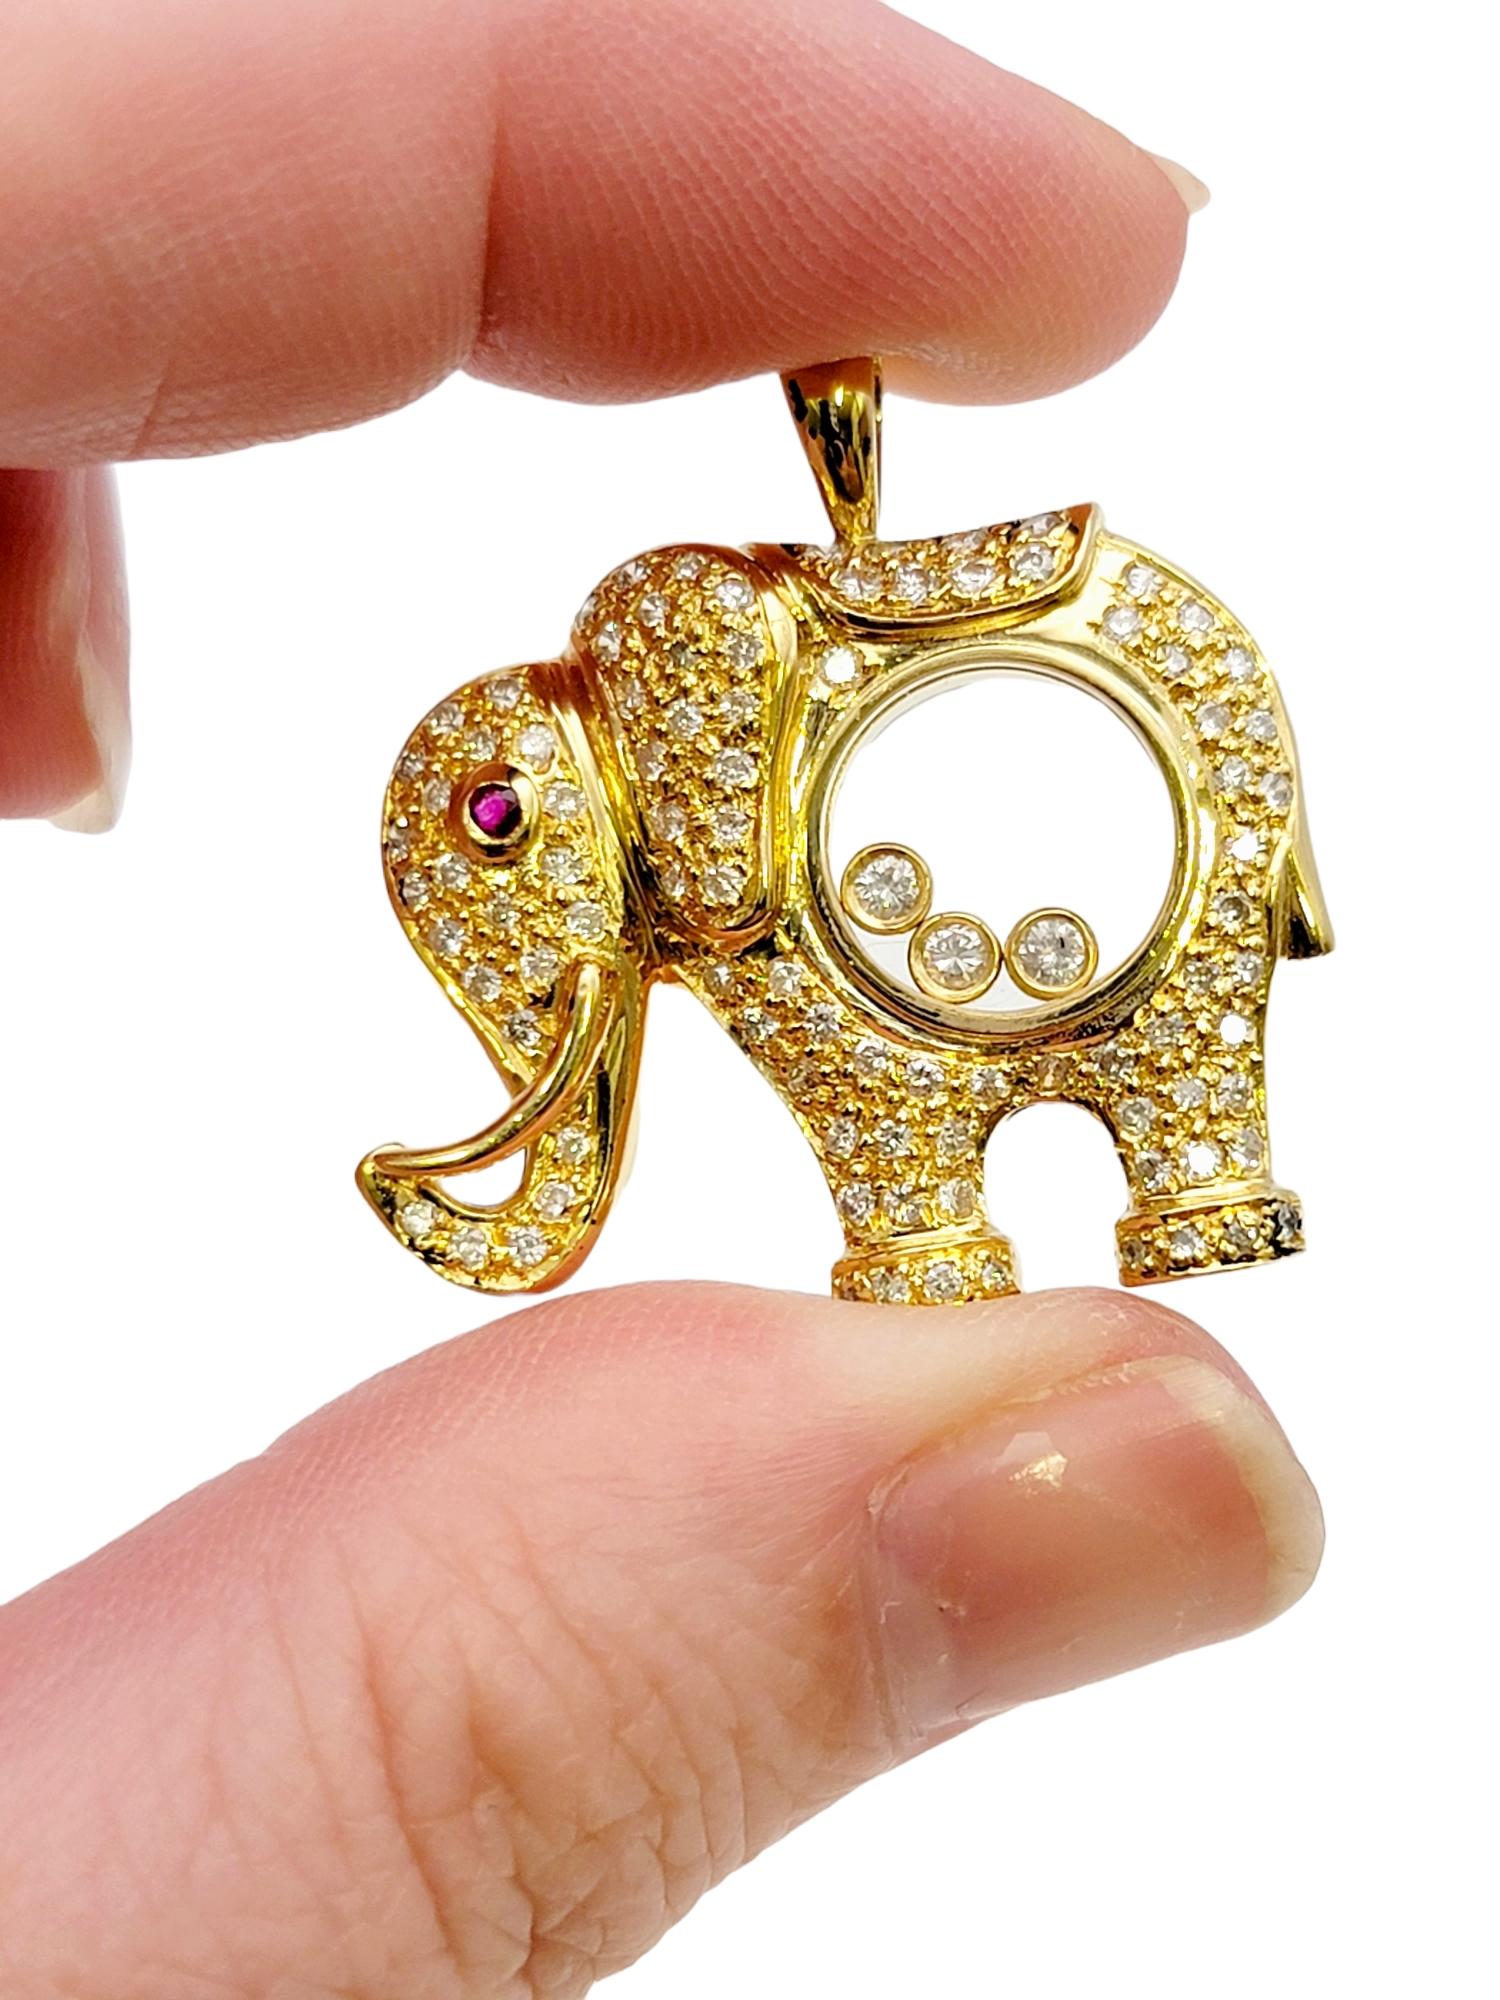 Floating Diamond and Pave Elephant Pendant with Ruby Eye in 18 Karat Yellow Gold 6